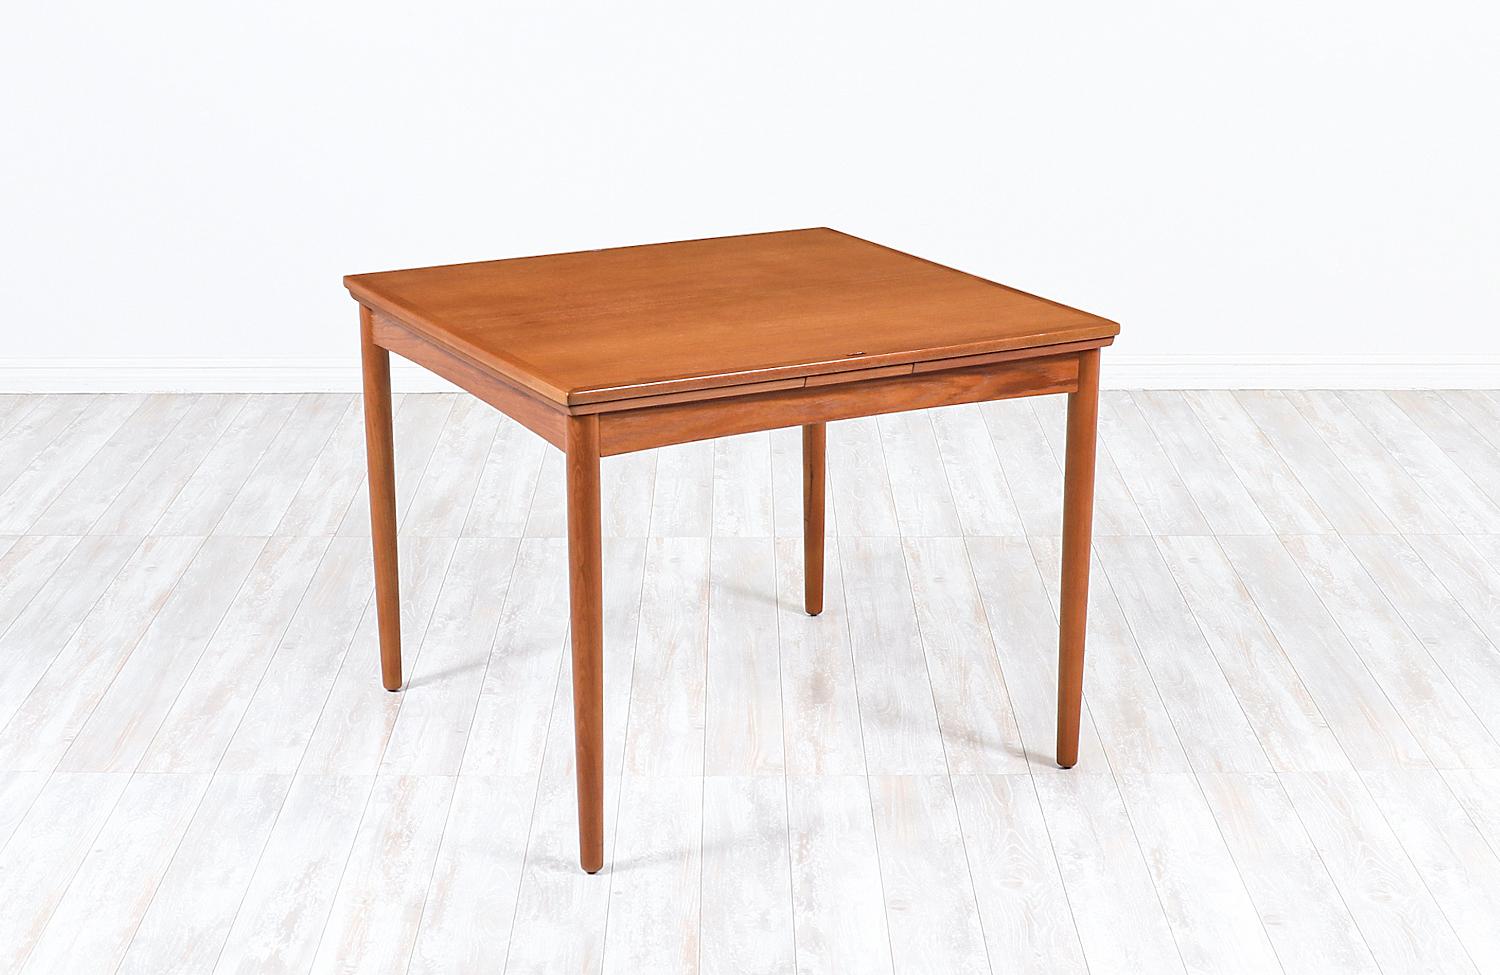 Carlo Jensen flip-top expanding dining / game table for Hundevad & Co.

Dimensions:
28in H x 35.25in, 62.75in W x 35.25in D
2x extension leaves 13.75in.